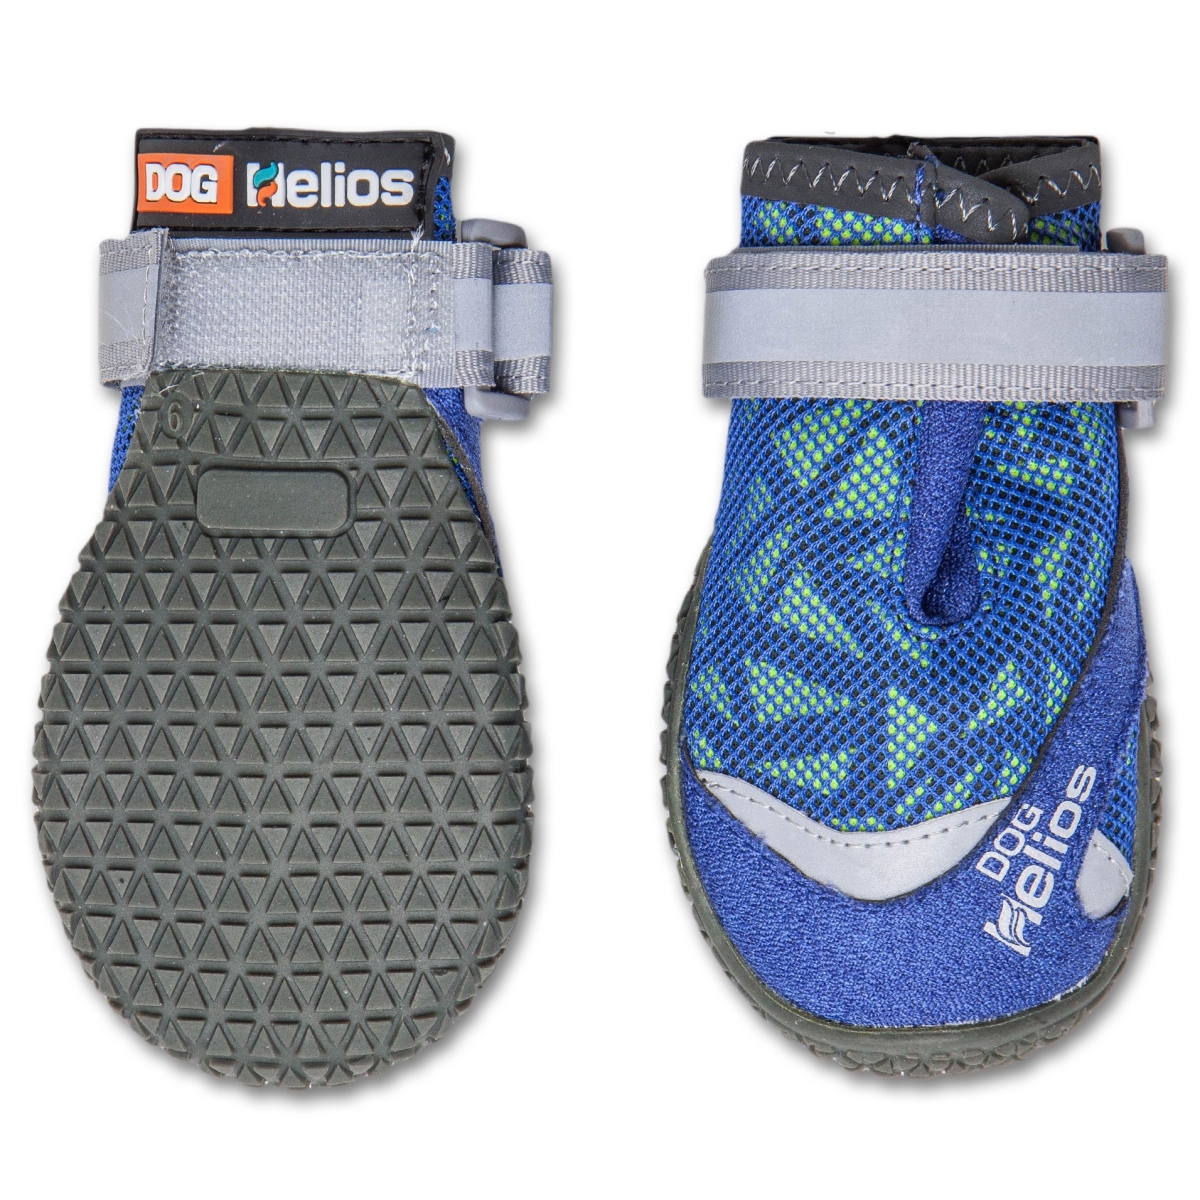 Picture of Dog Helios F17BLMD Surface Premium Grip Performance Dog Shoes - Blue - Medium